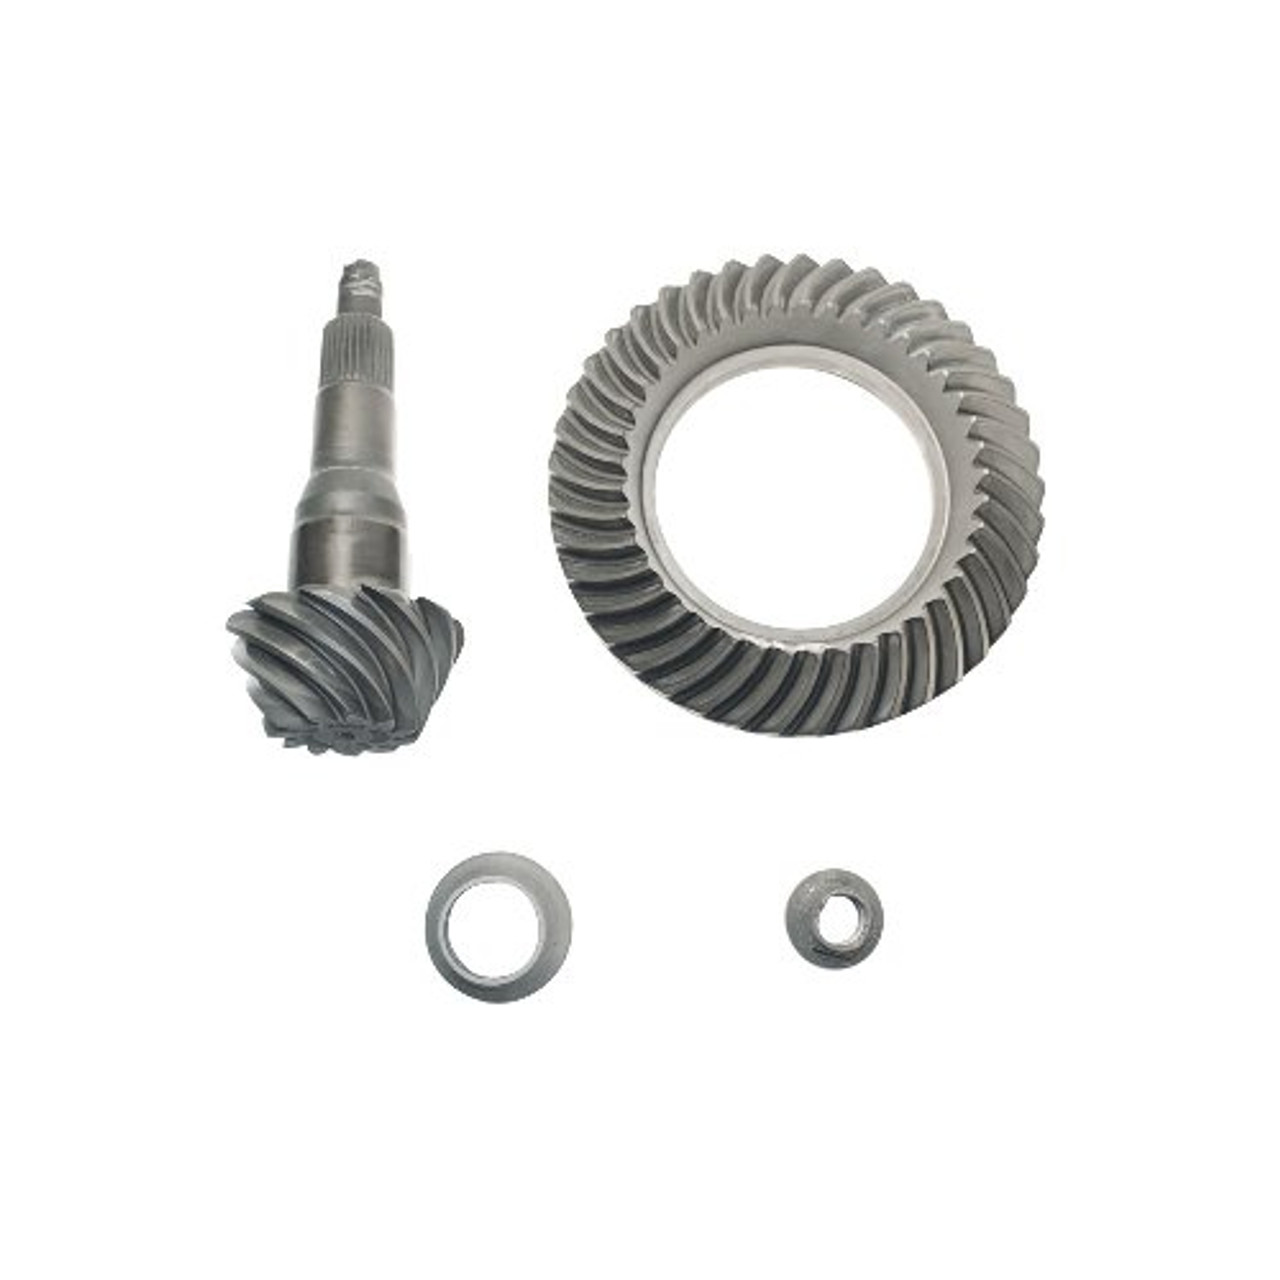 Ford Racing 2015 Mustang GT 8.8-inch Ring and Pinion Set - 3.55 Ratio (FRPP M-4209-88355A)